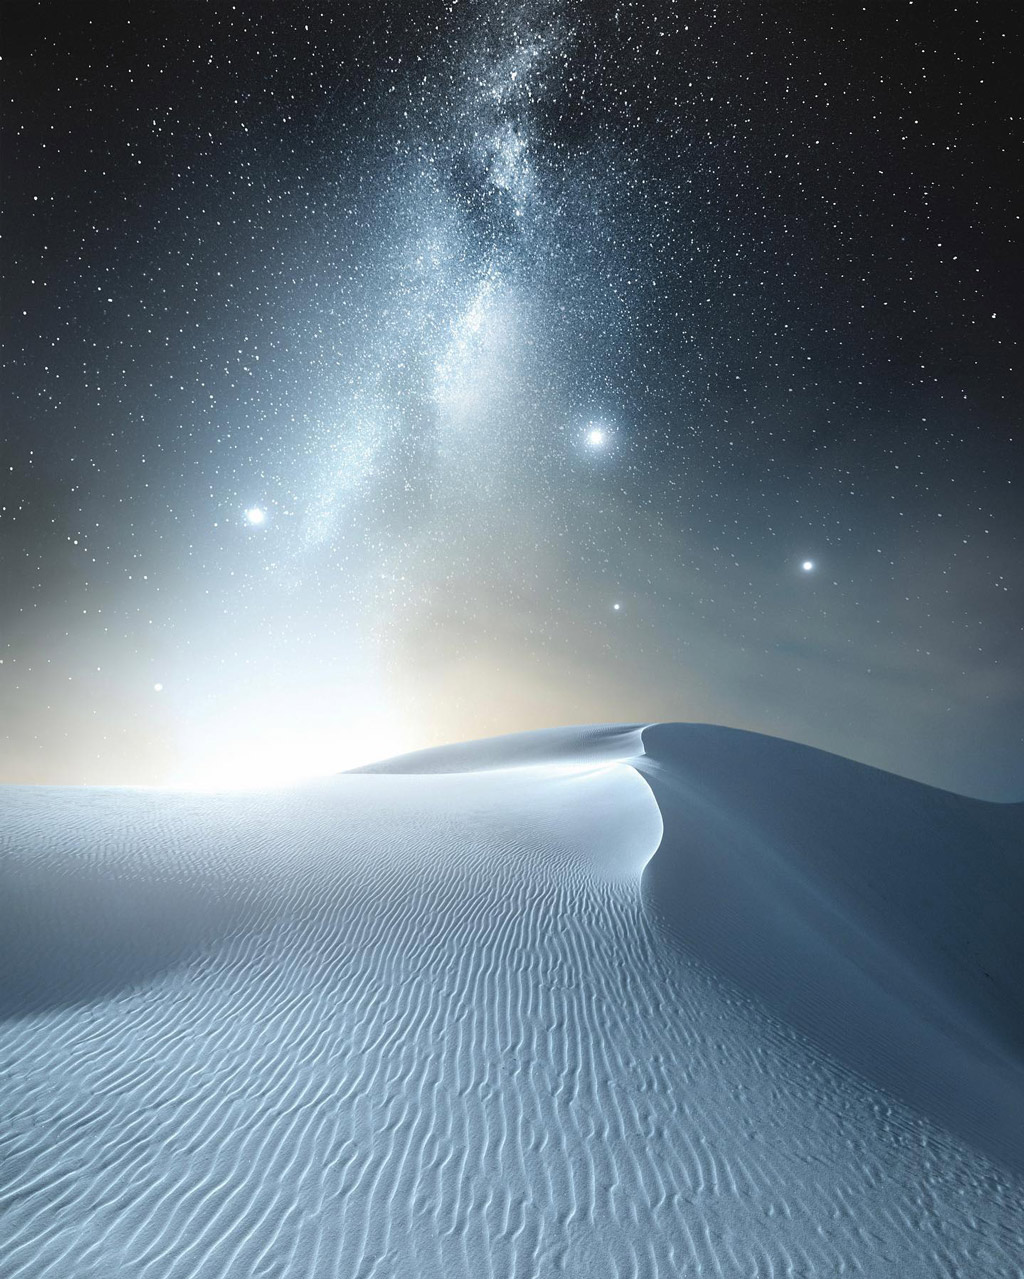 White sands in New Mexico